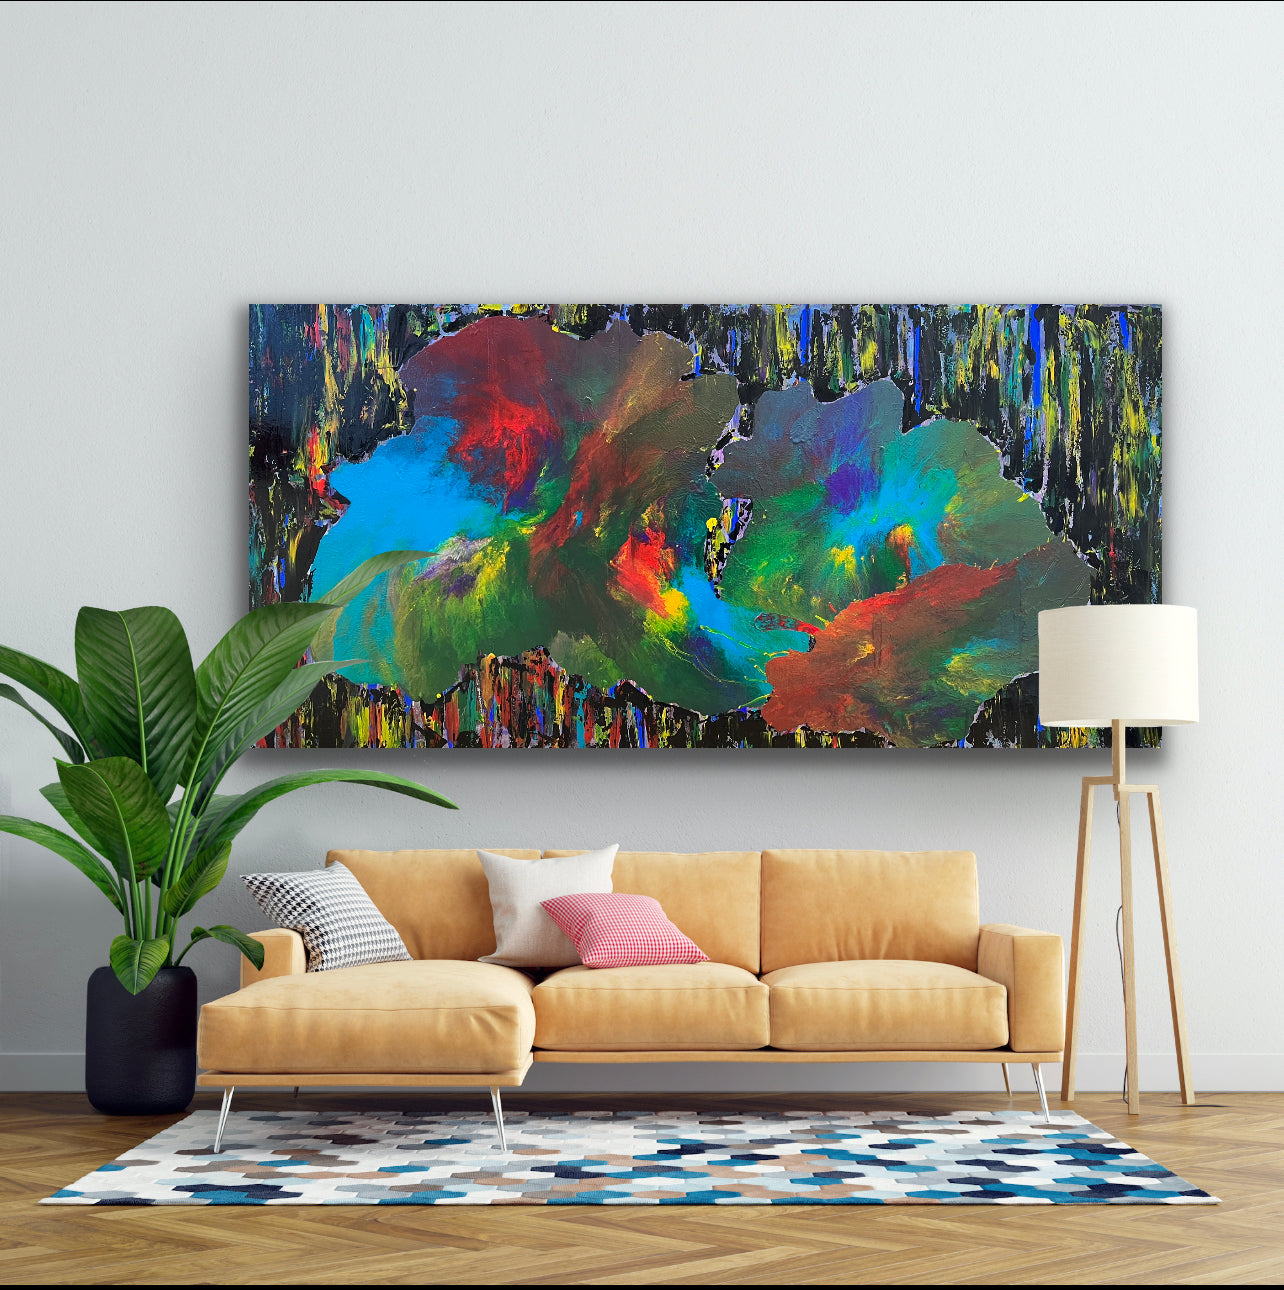 Galactic Sky (91 cm x 182 cm)Textured Abstract Painting by Joanne Daniel